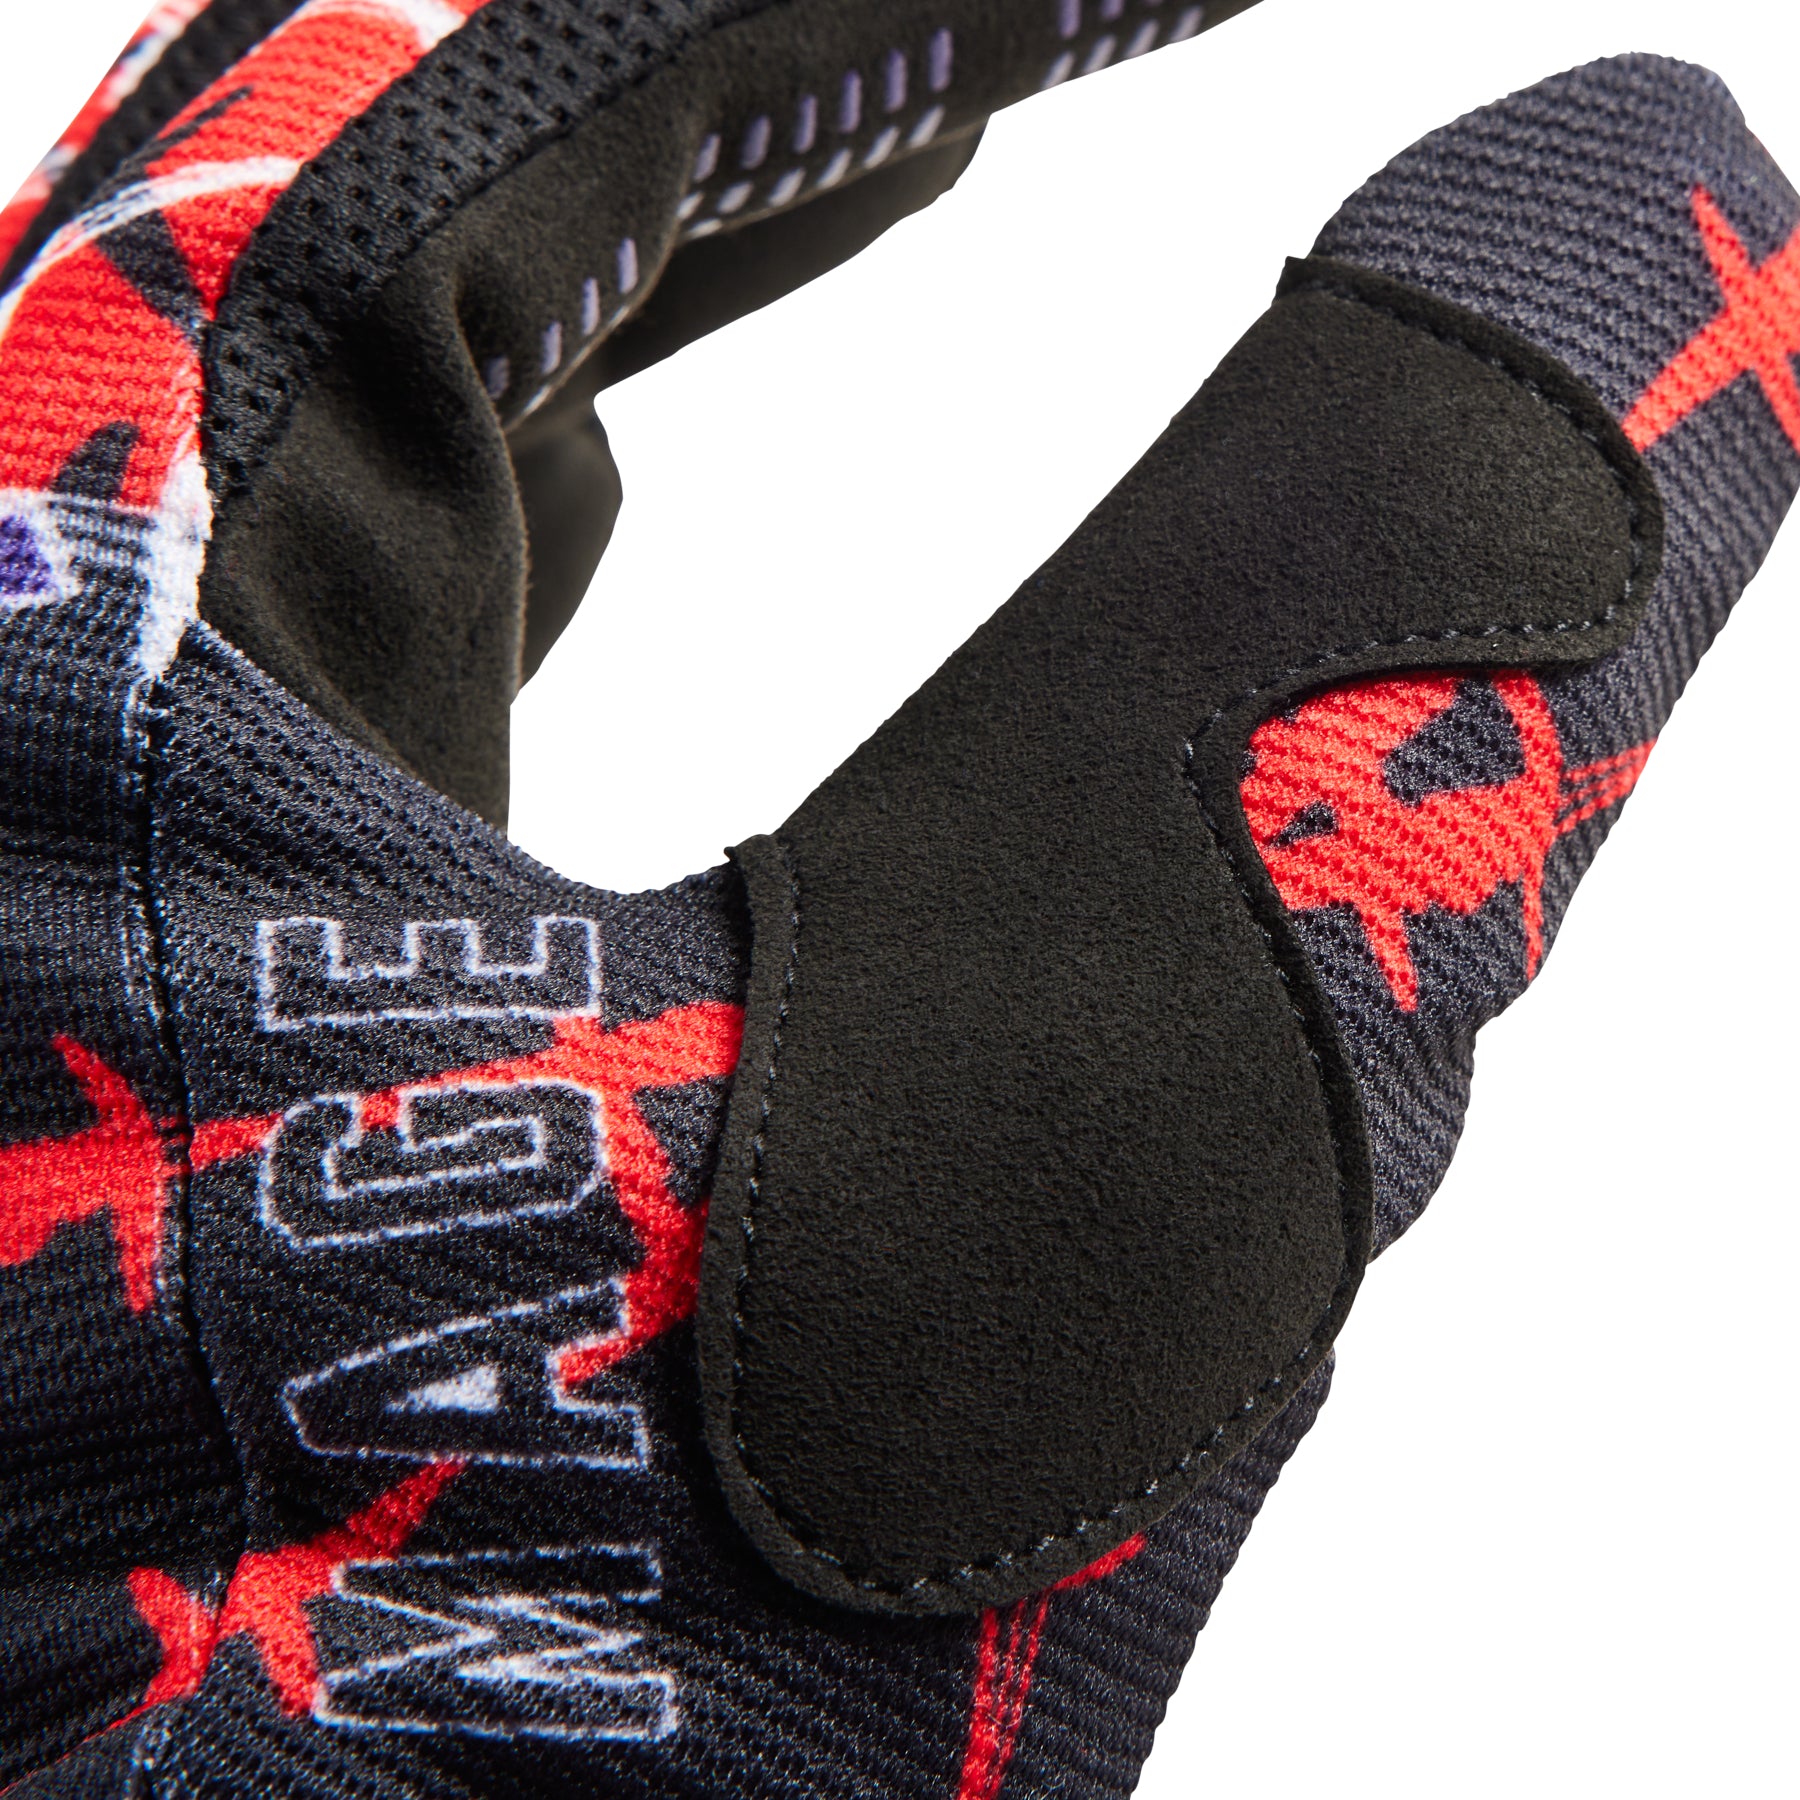 Fox Special Edition 180 Barbed Wire MX Gloves - Red – mastersofmx